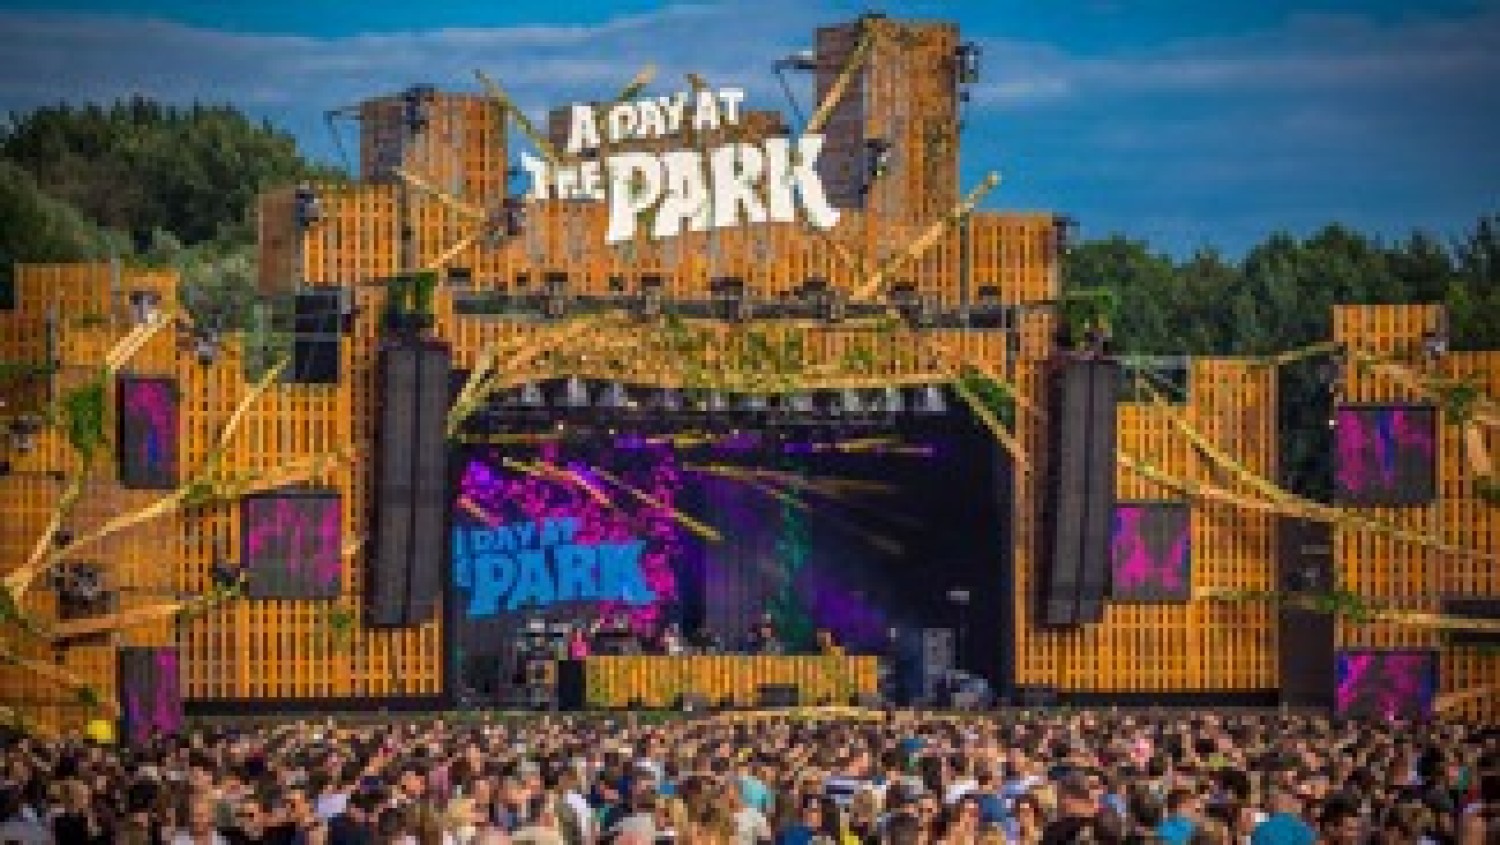 Party nieuws: Festival A Day at the Park verhuist naar Rotterdam